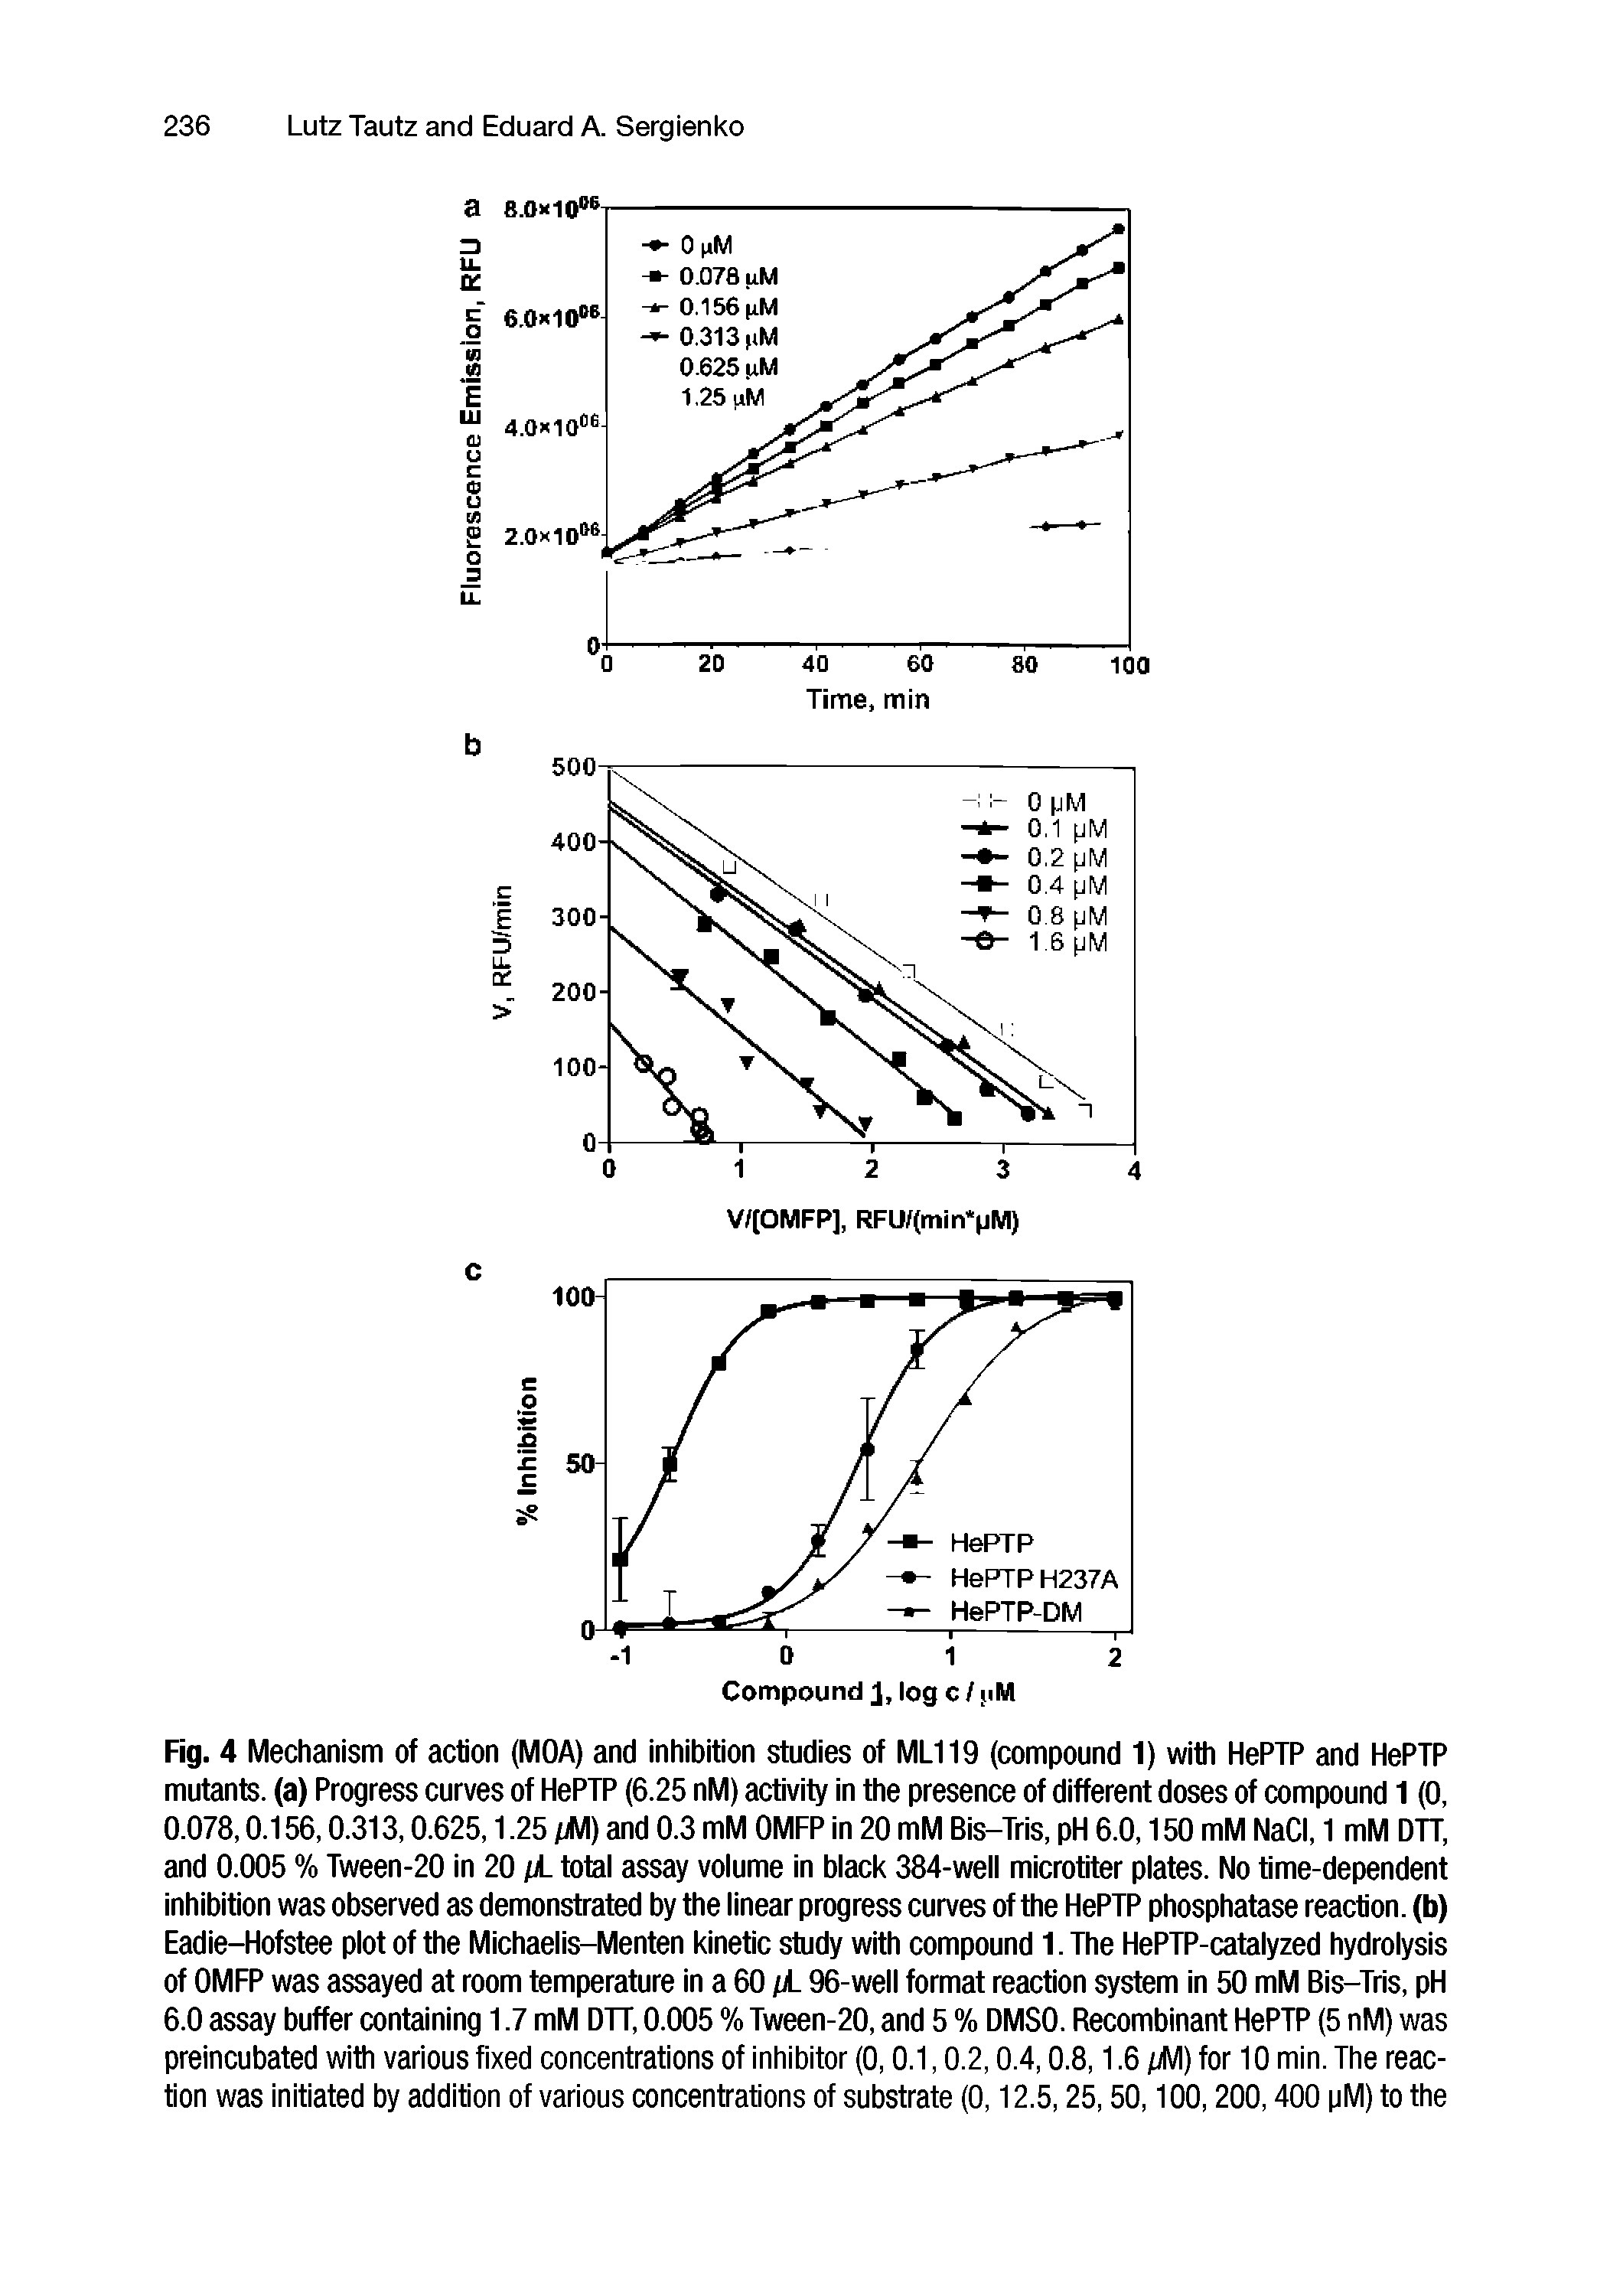 Fig. 4 Mechanism of action (MOA) and inhibition studies of ML119 (compound 1) with HePTP and HePTP mutants, (a) Progress curves of HePTP (6.25 nM) activity in the presence of different doses of compound 1 (0, 0.078,0.156,0.313,0.625,1.25 /jM) and 0.3 mM OMFP in 20 mM Bis-Tris, pH 6.0,150 mM NaCI, 1 mM DH, and 0.005 % Tween-20 in 20 /jL totai assay voiume in biack 384-weii microtiter plates. No time-dependent inhibition was observed as demonstrated by the linear progress curves of the HePTP phosphatase reaction, (b) Eadie-Hofstee plot of the Michaelis-Menten kinetic study with compound I.The HePTP-catalyzed hydrolysis of OMFP was assayed at room temperature in a 60 /jL 96-well format reaction system in 50 mM Bis-Tris, pH 6.0 assay buffer containing 1.7 mM DTT, 0.005 % Tween-20, and 5 % DMSO. Recombinant HePTP (5 nM) was preincubated with various fixed concentrations of inhibitor (0,0.1,0.2,0.4,0.8,1.6 /jM) for 10 min. The reaction was initiated by addition of various concentrations of substrate (0,12.5,25,50,100,200,400 pM) to the...